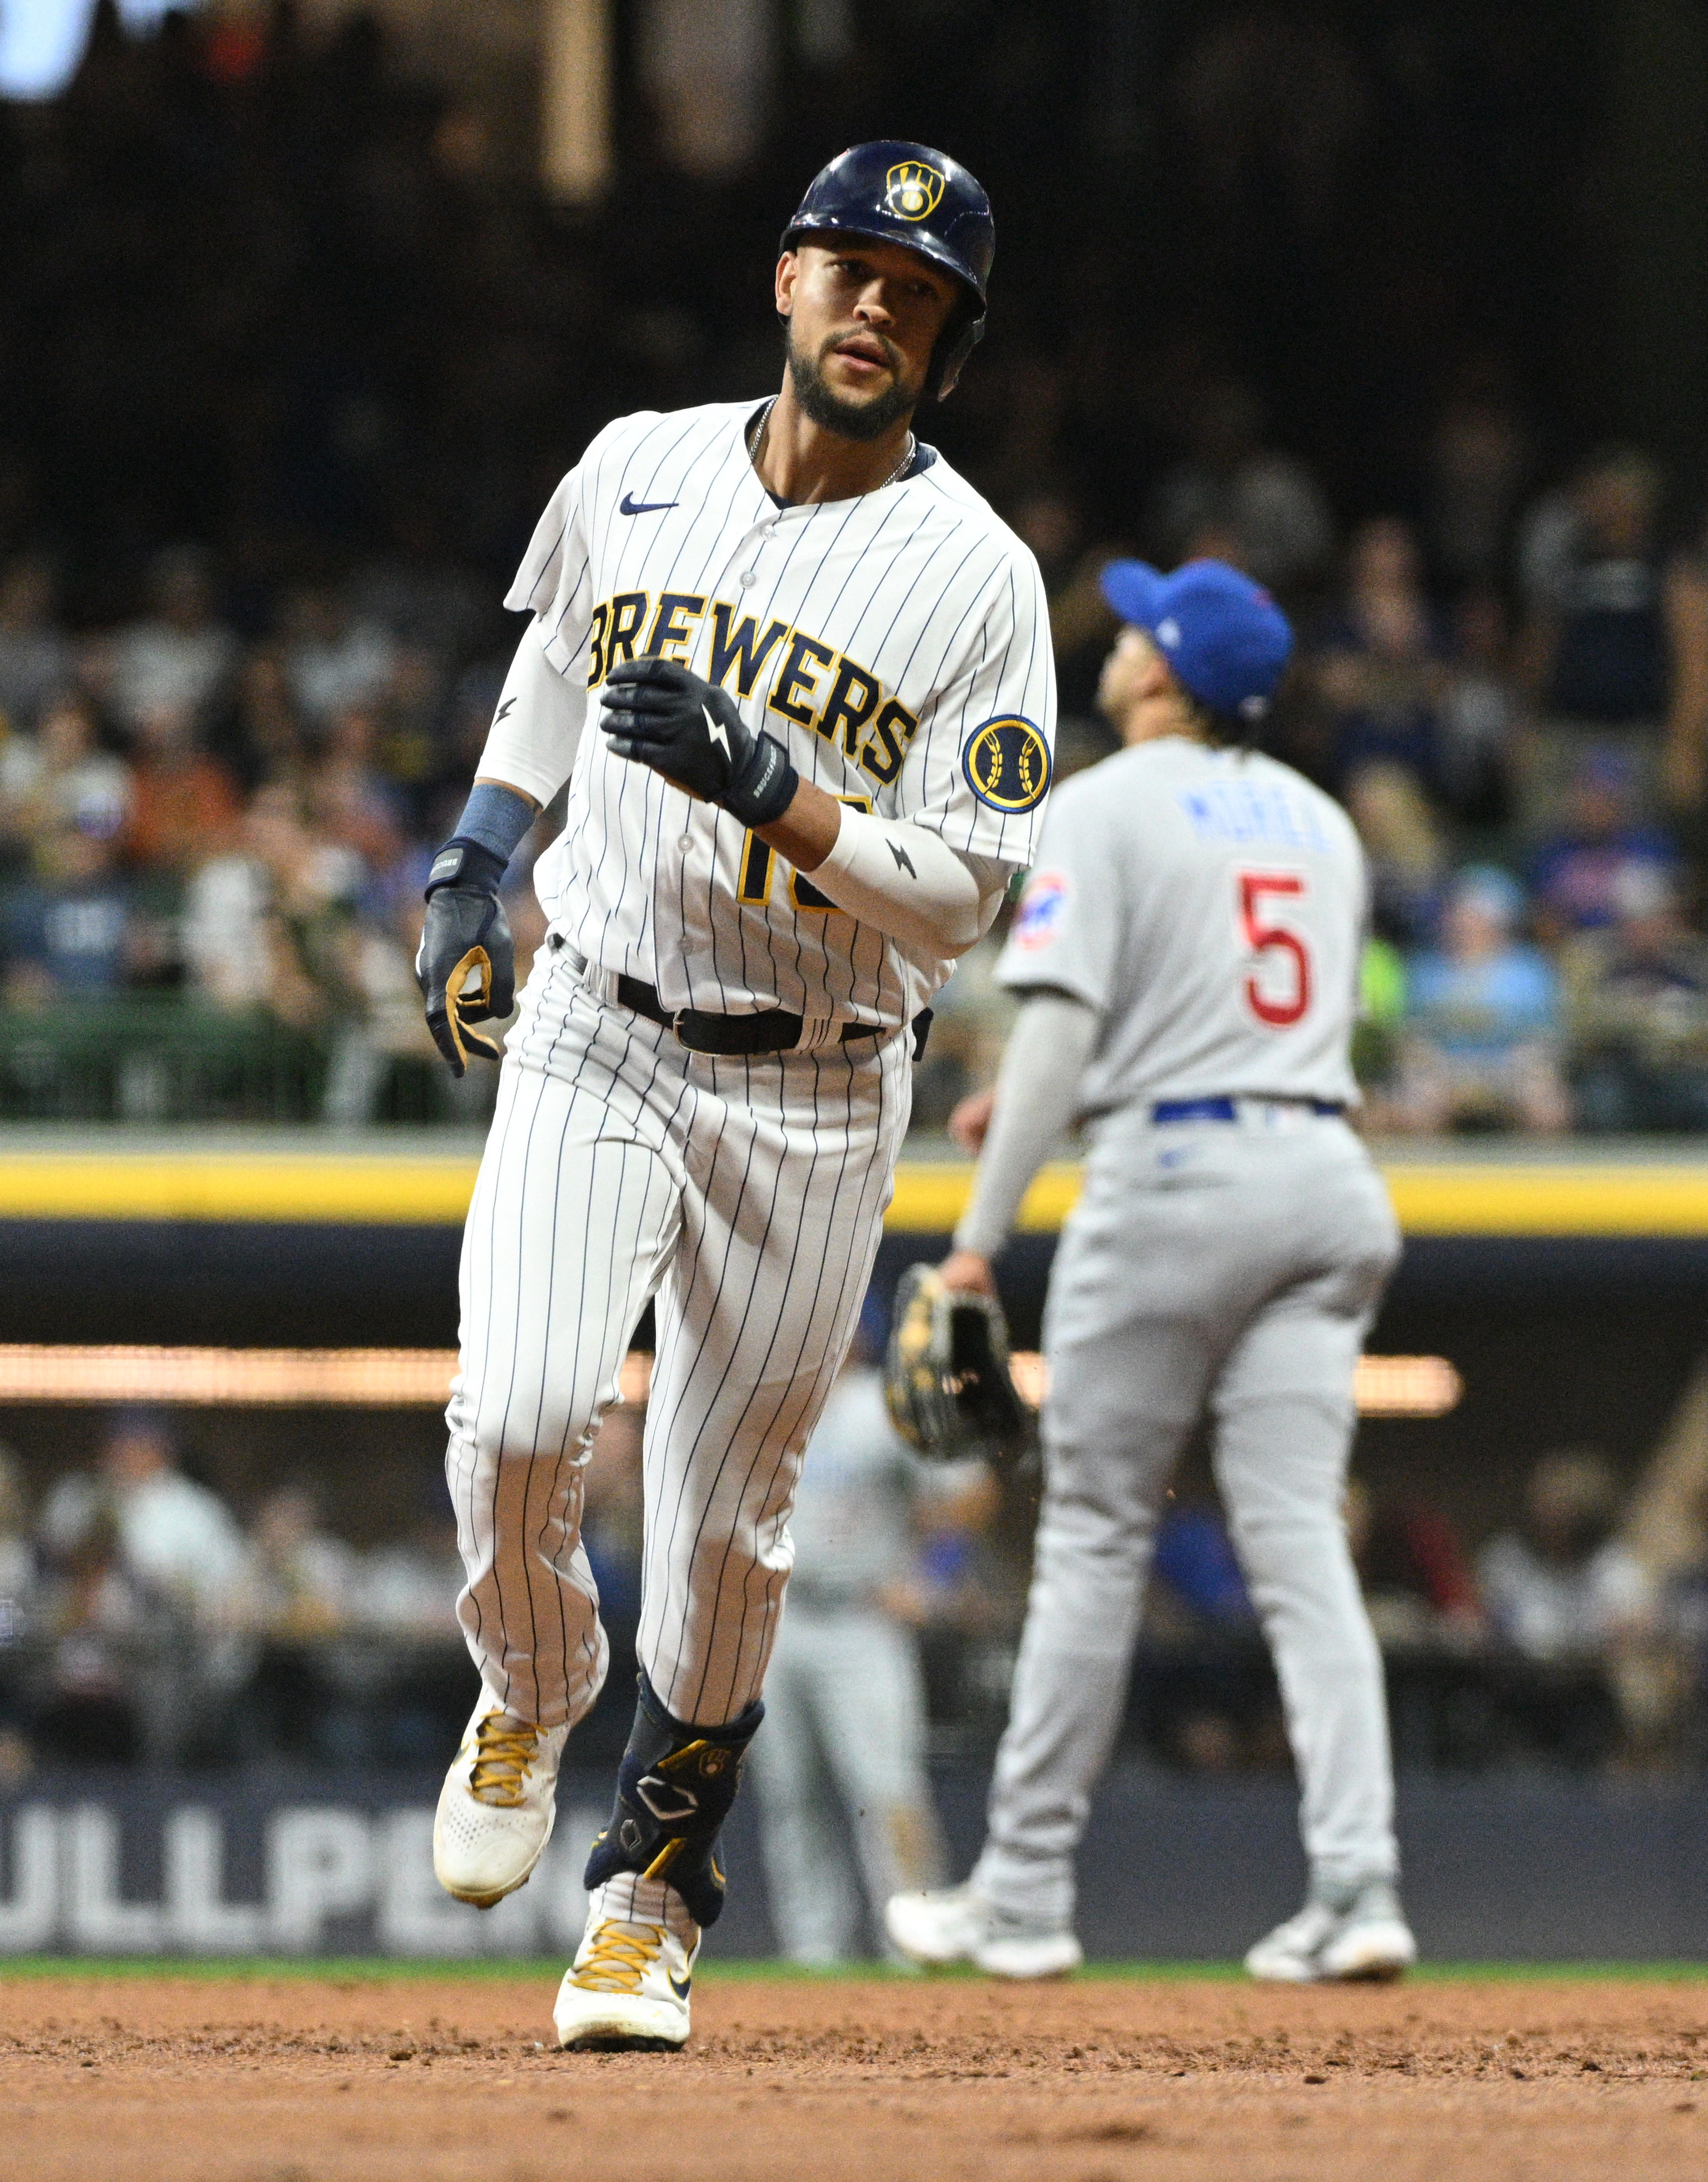 Big day by Willy Adames helps Brewers snap eight-game losing streak